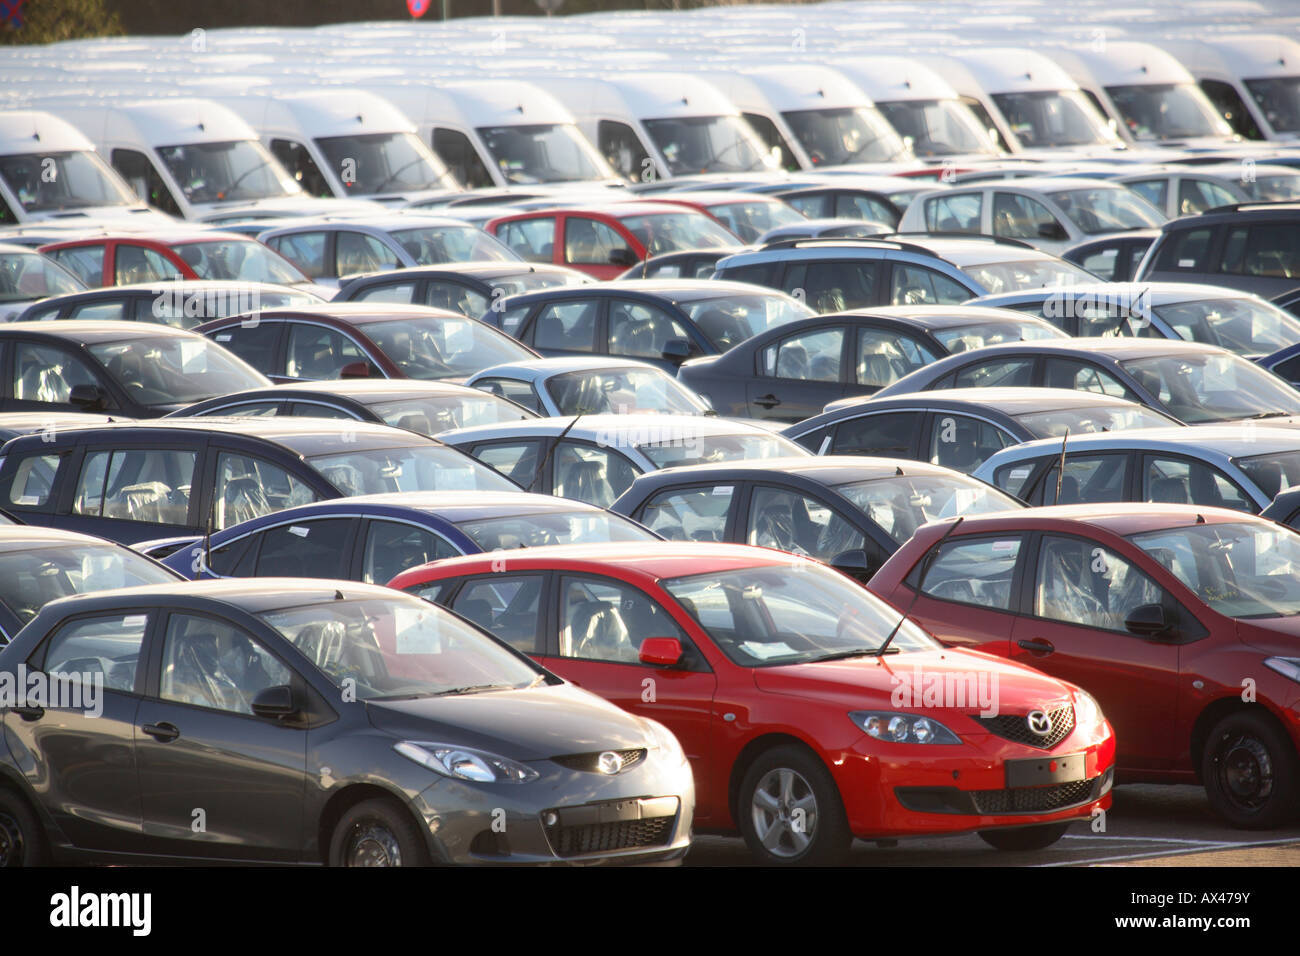 Vehicle pricing a major concern for leasing sector